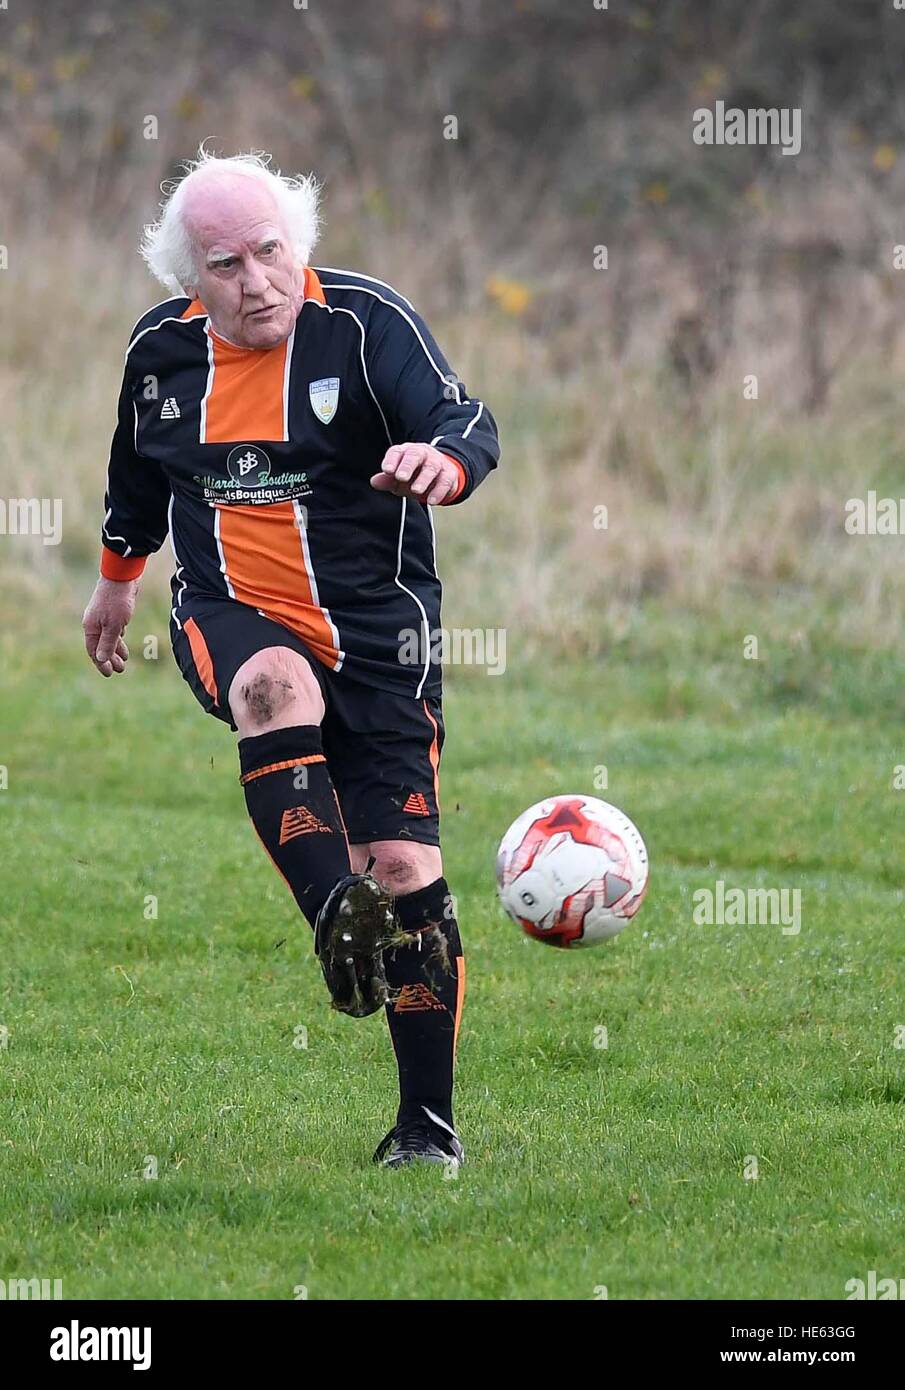 Dickie Borthwick, 81 year old footballer, older man playing football, OAP  playing sport Stock Photo - Alamy